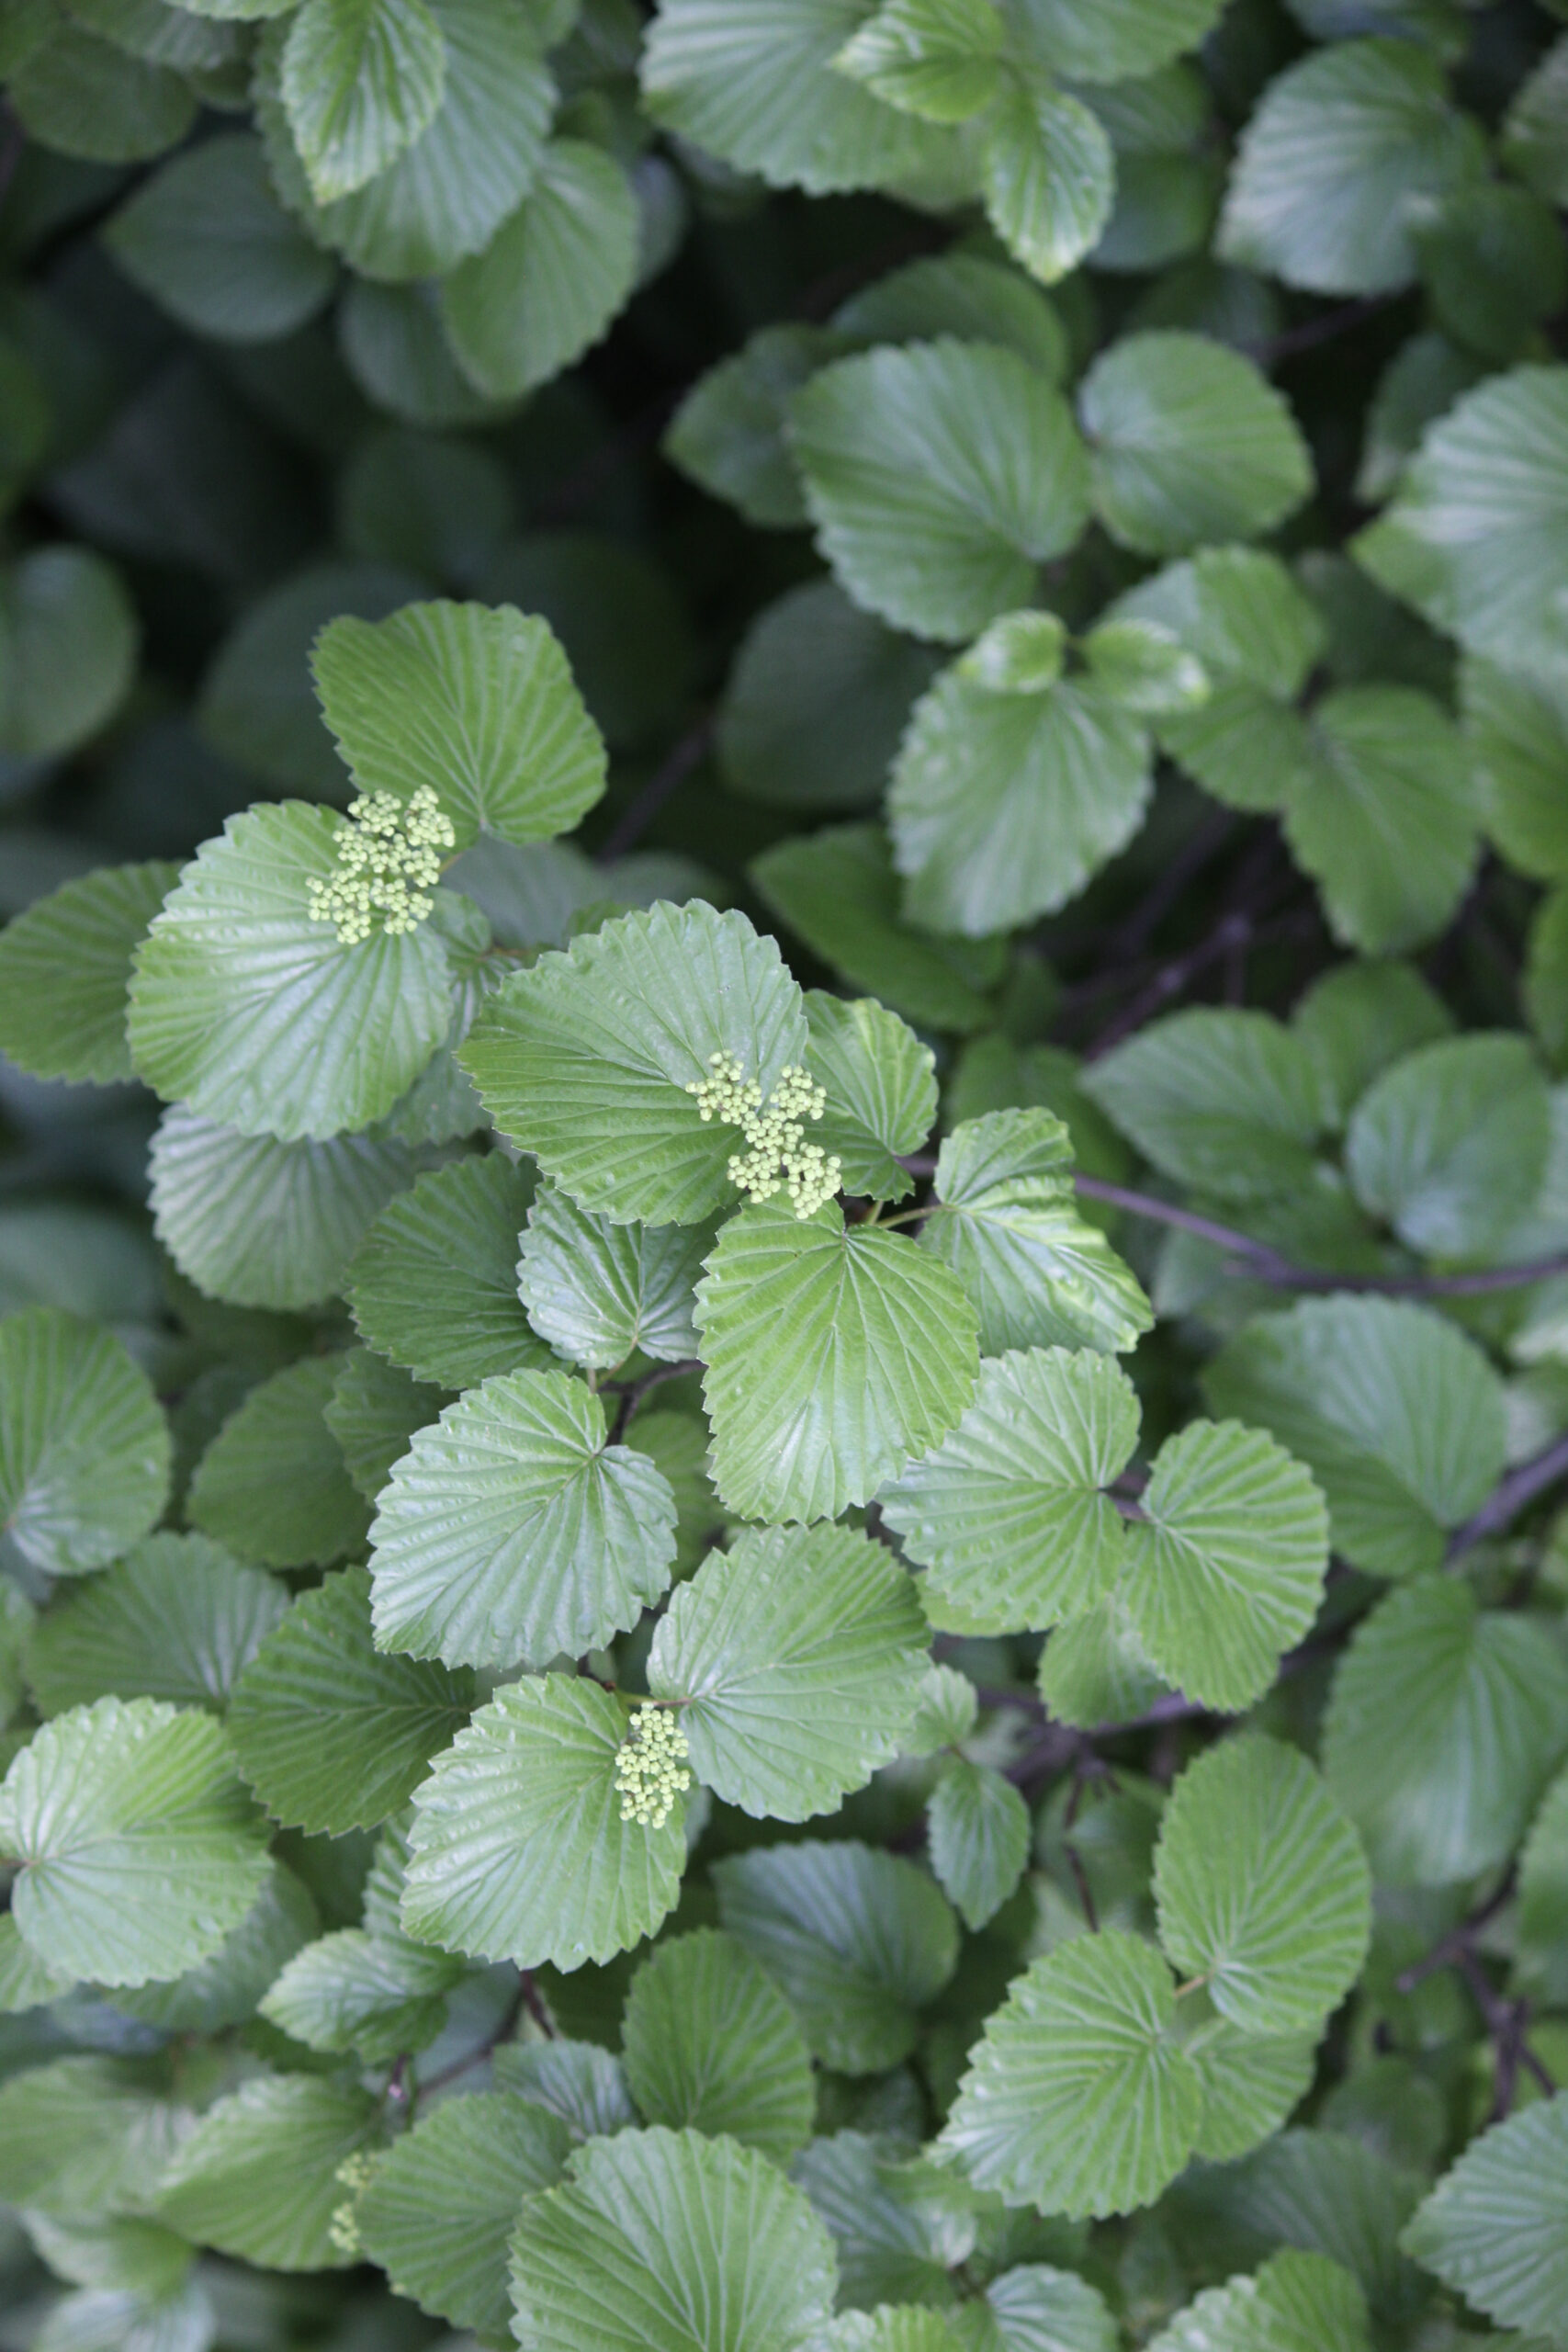 Leaves of a green shrub with two white berries